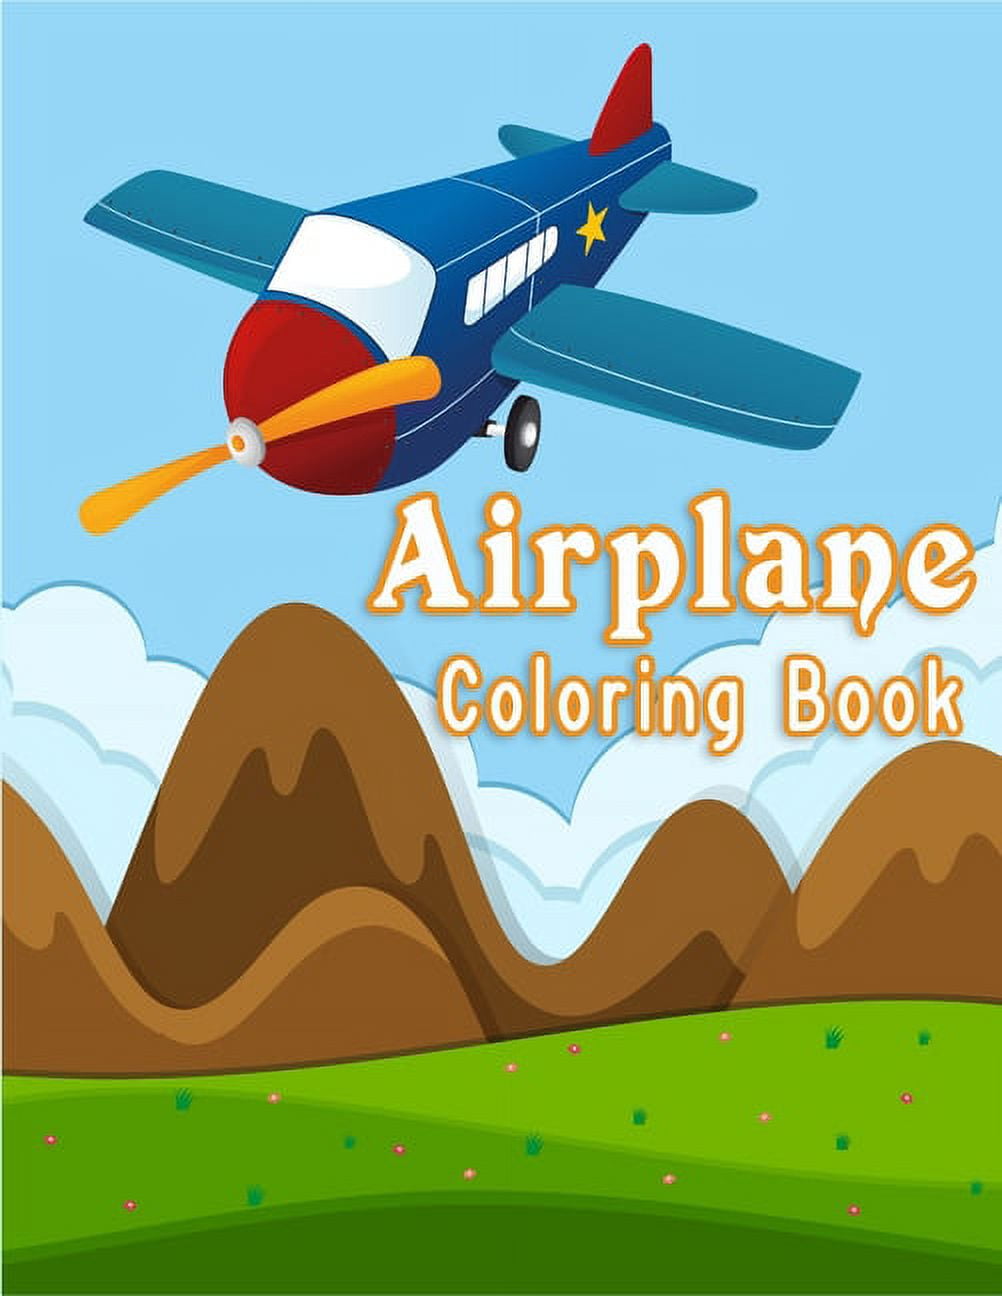 Airplane Coloring Book for kids ages 4-8: Aeroplanes Hot Air balloon  Helicopters and Everything That Flies Coloring Book, coloring book for kids  Ages  4-8, Fun Children's Learning Activities for K by